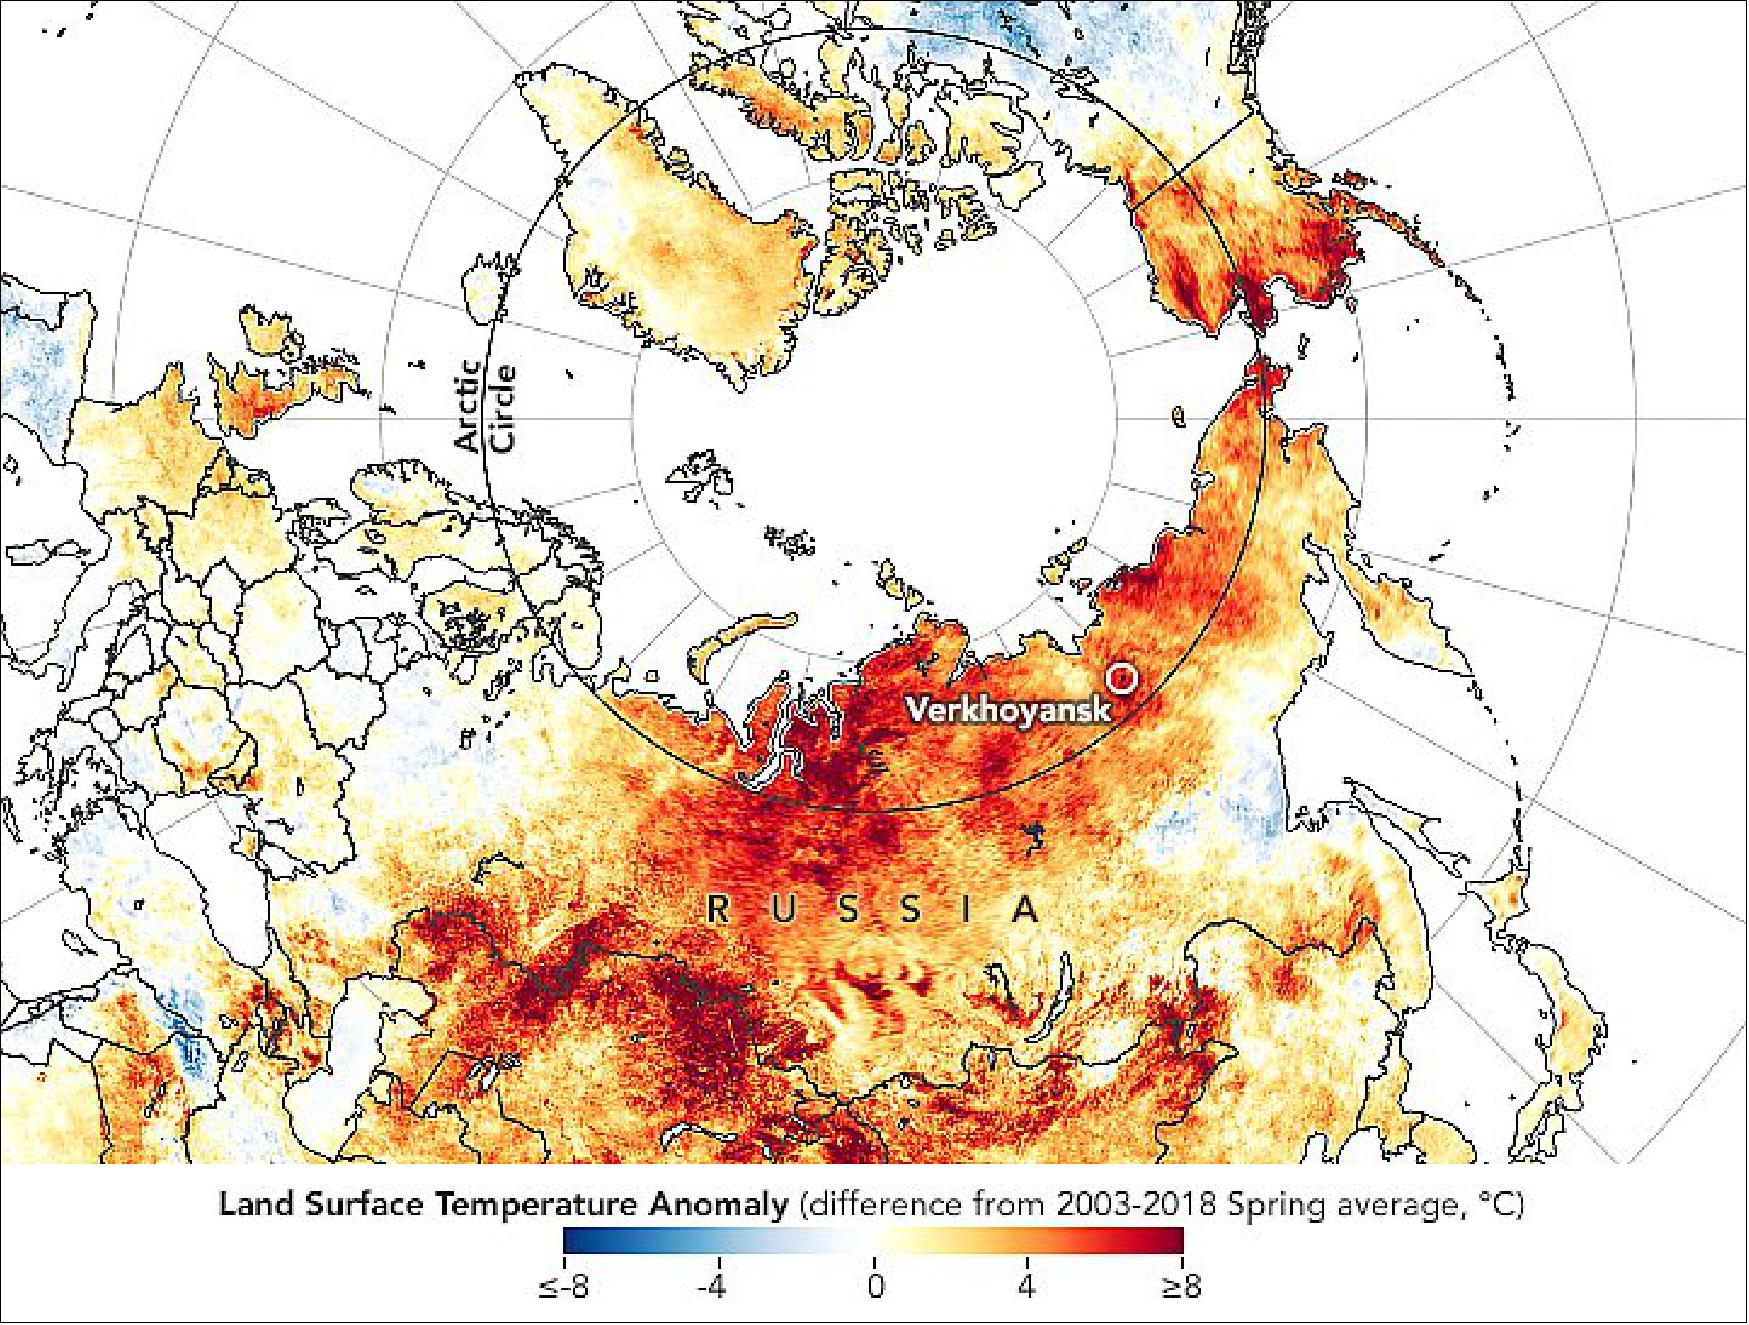 Figure 73: This map shows land surface temperature anomalies from March 19 to June 20, 2020. Red colors depict areas that were hotter than average for the same period from 2003-2018; blues were colder than average. The map is based on data from the MODIS instrument on NASA's Aqua satellite (image credit: NASA Earth Observatory images by Joshua Stevens, using data from the Level 1 and Atmospheres Active Distribution System (LAADS) and Land Atmosphere Near real-time Capability for EOS (LANCE), and data from NASA EOSDIS/LANCE and GIBS/Worldview and the Suomi NPP. Story by Adam Voiland)